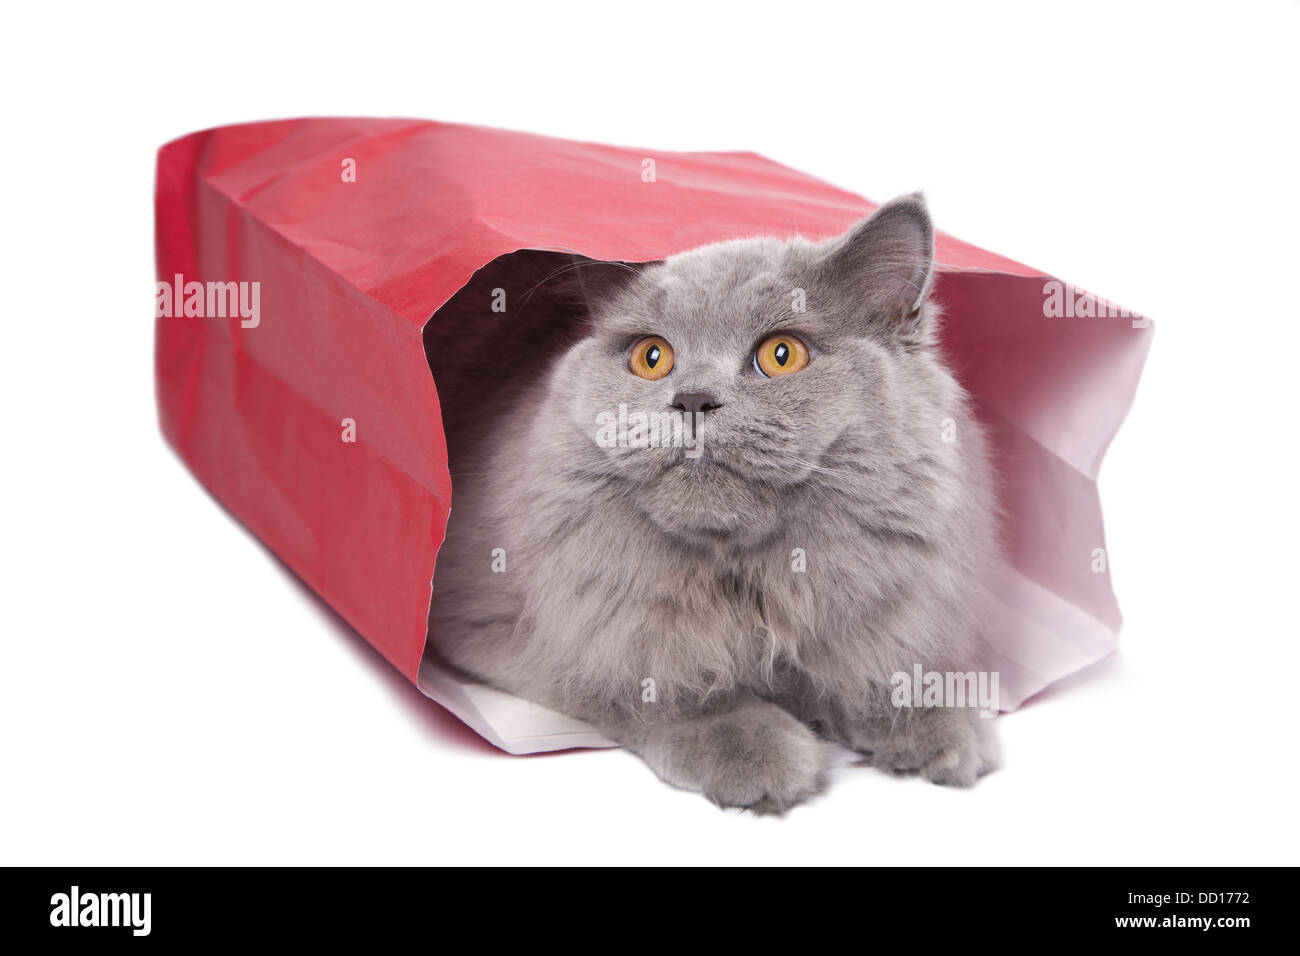 cute British kitten in red bag isolated Stock Photo